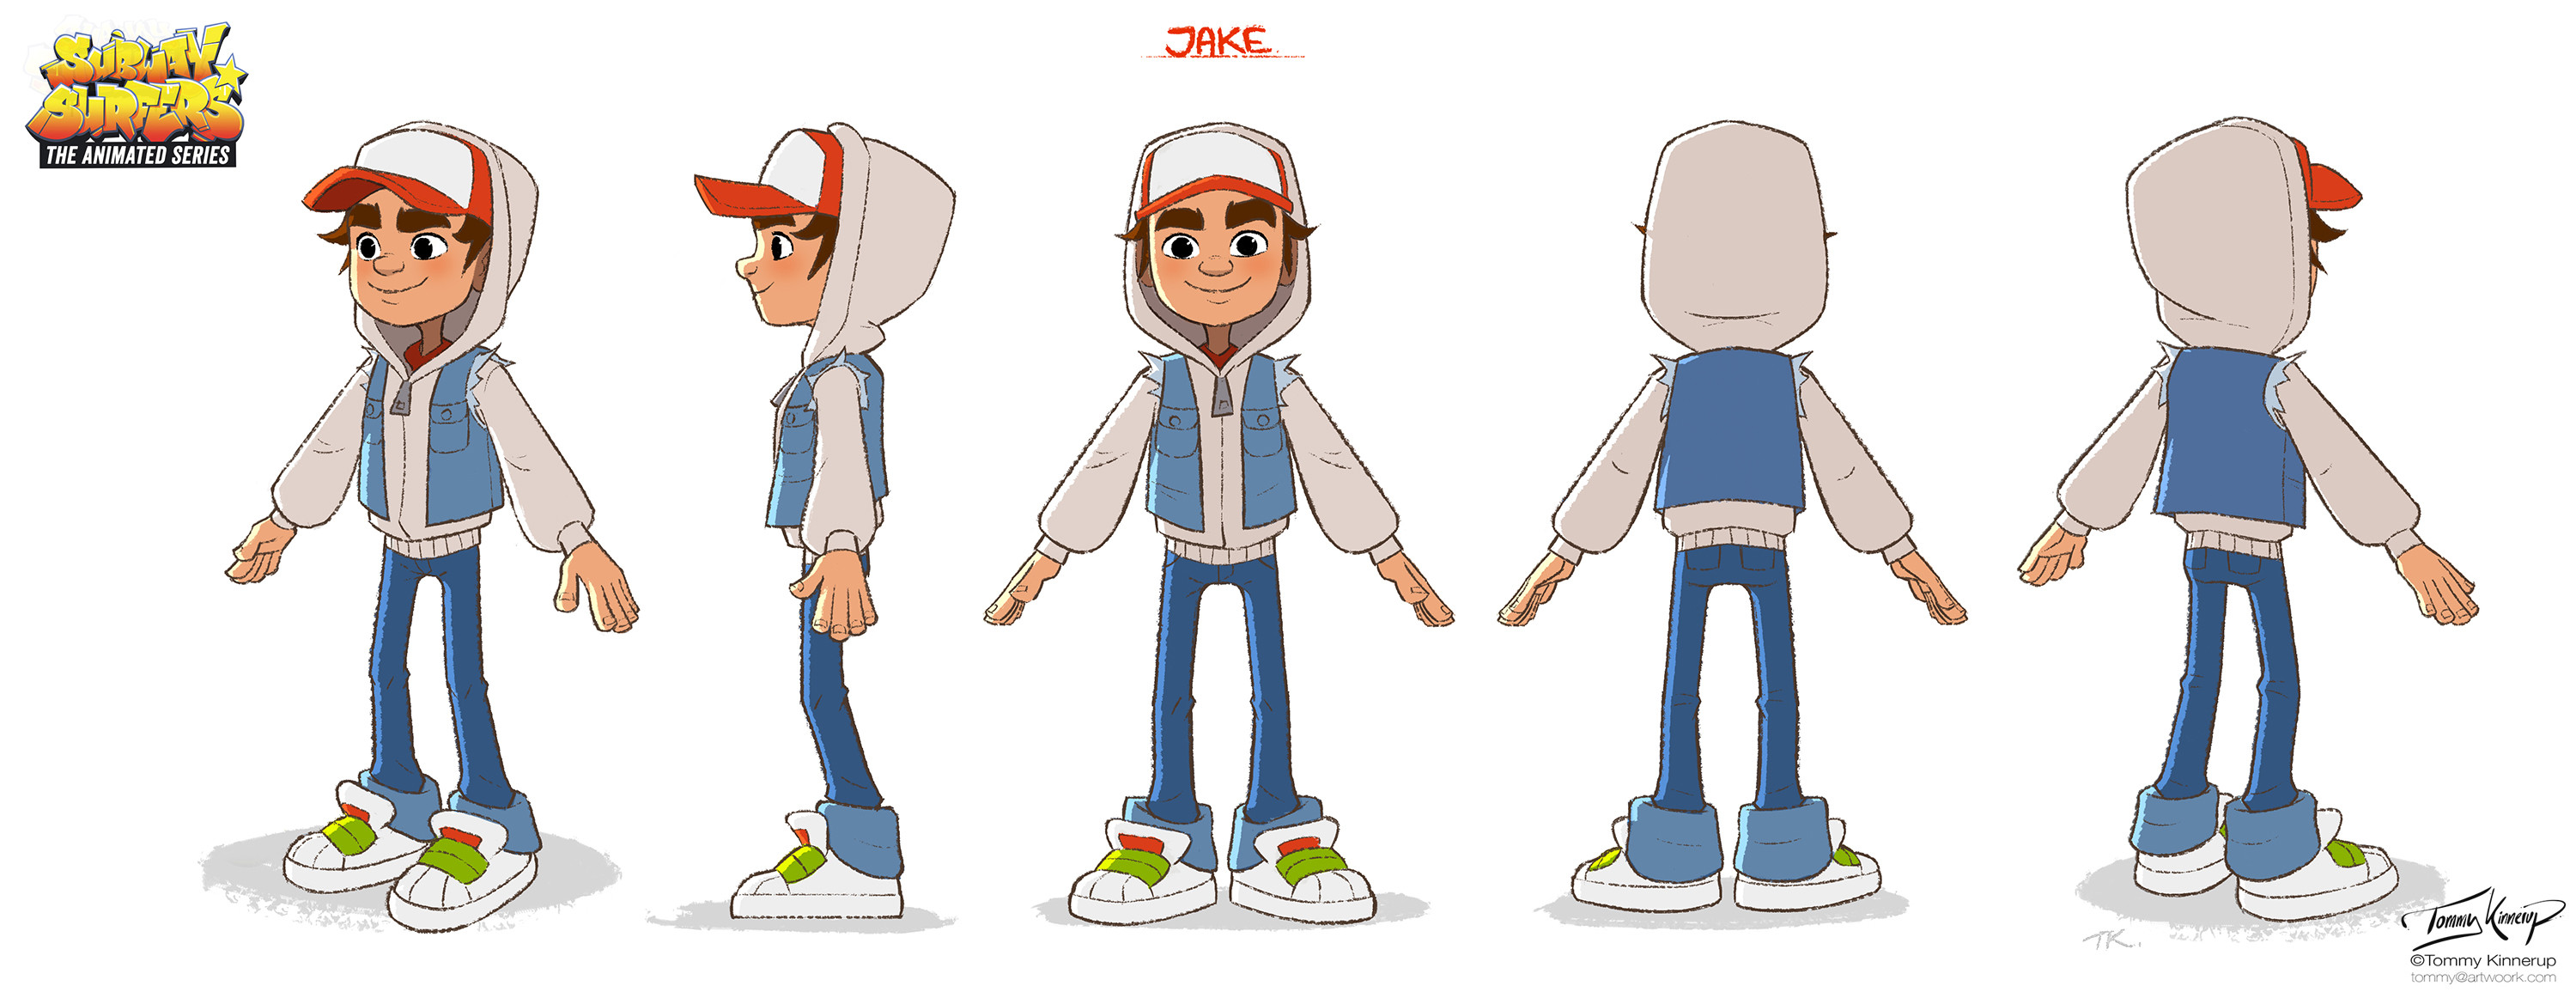 tommykinnerup - Character Designs for Subway Surfers The Animated